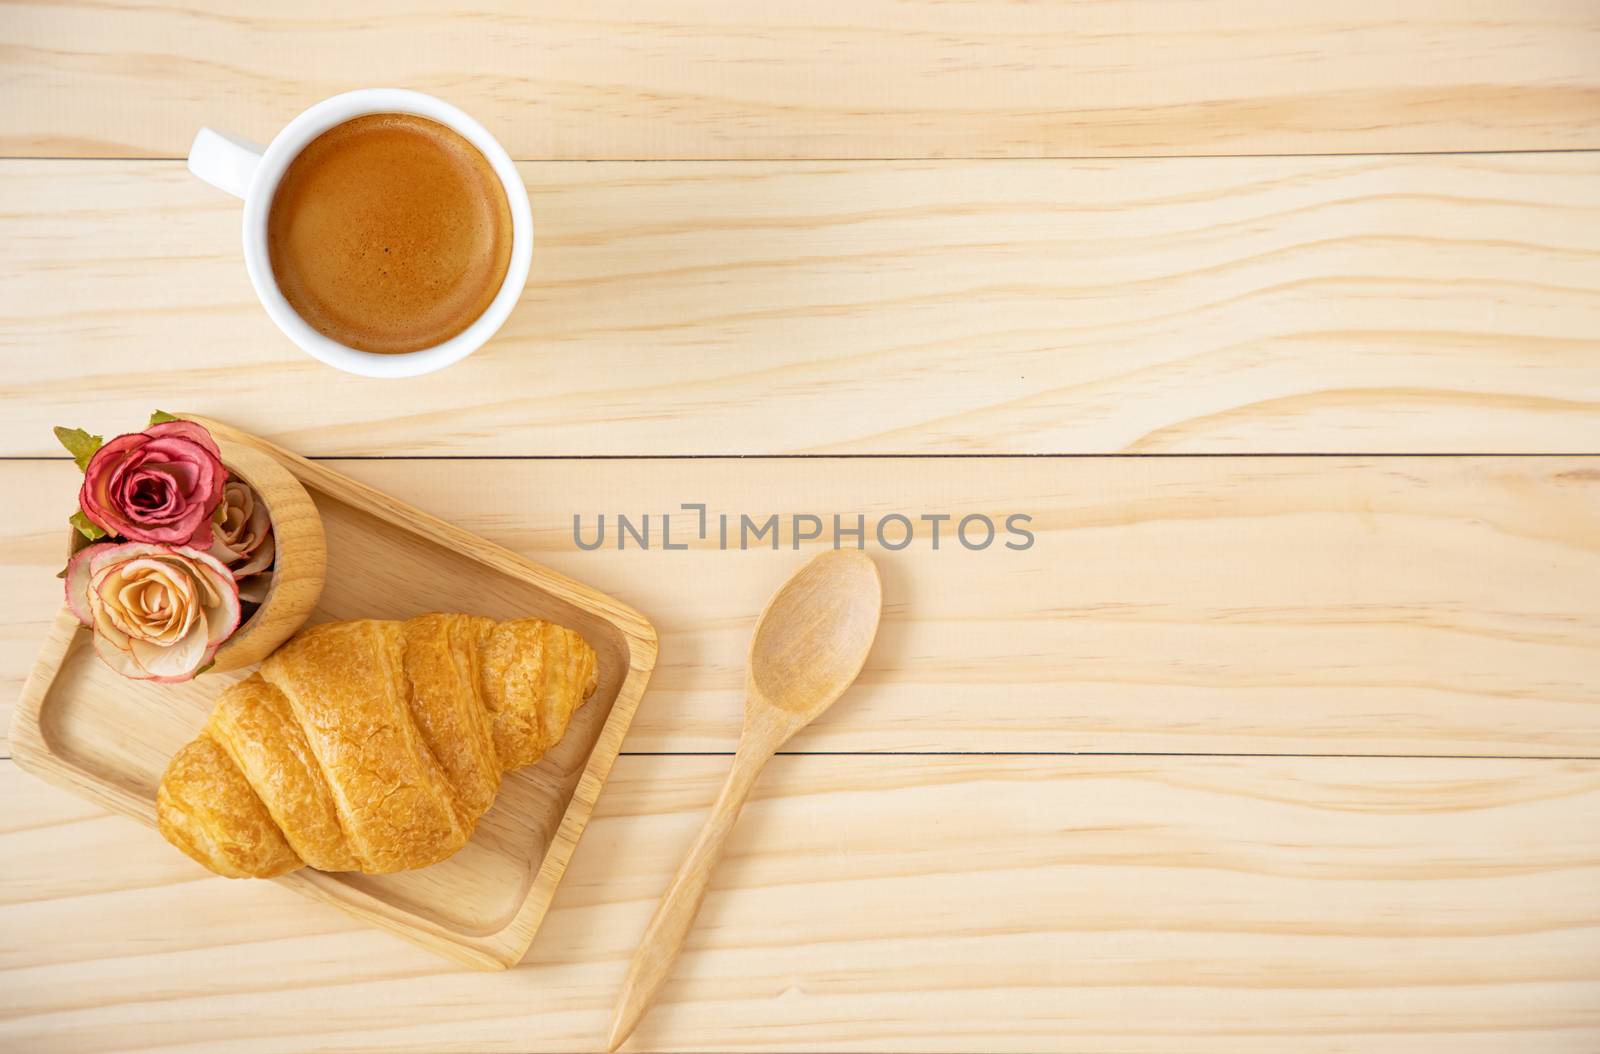 A piece of butter croissant on a squate wooden plate and a cup of coffee in white ceramic mug. Wooden background.